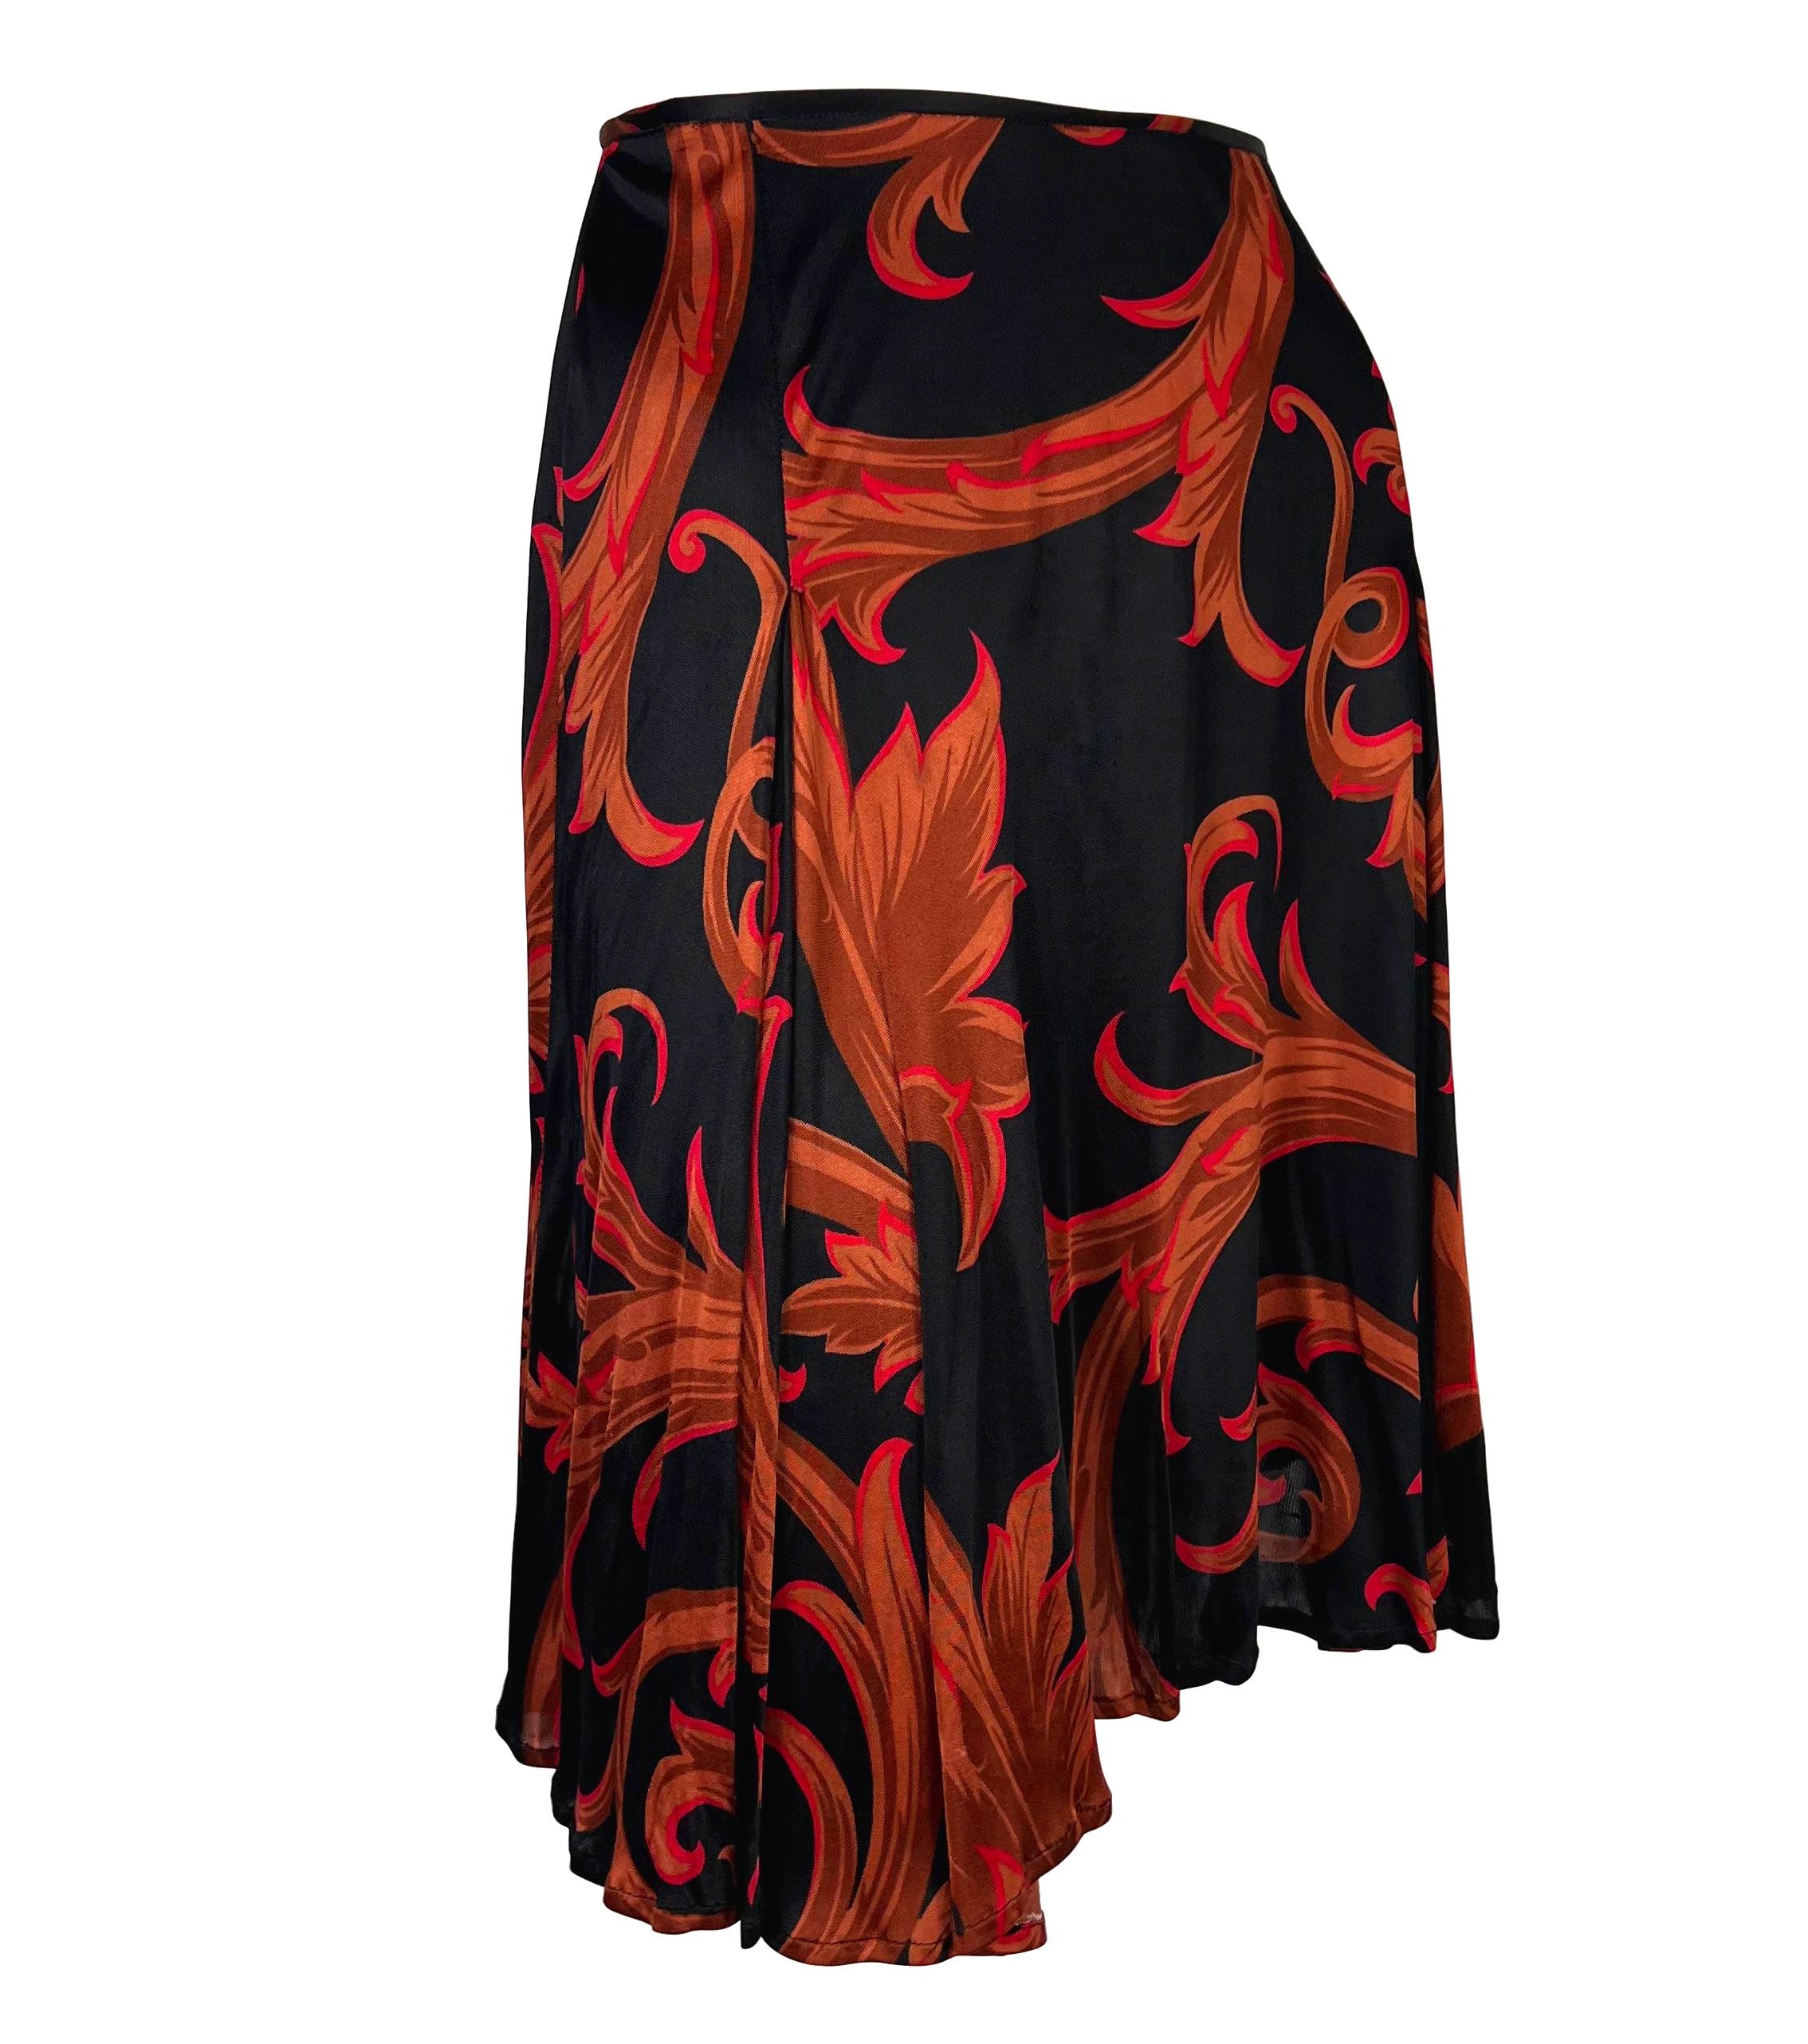 F/W 2000 Gianni Versace by Donatella Black Red Viscose Baroque Print Flare Skirt In Good Condition For Sale In West Hollywood, CA